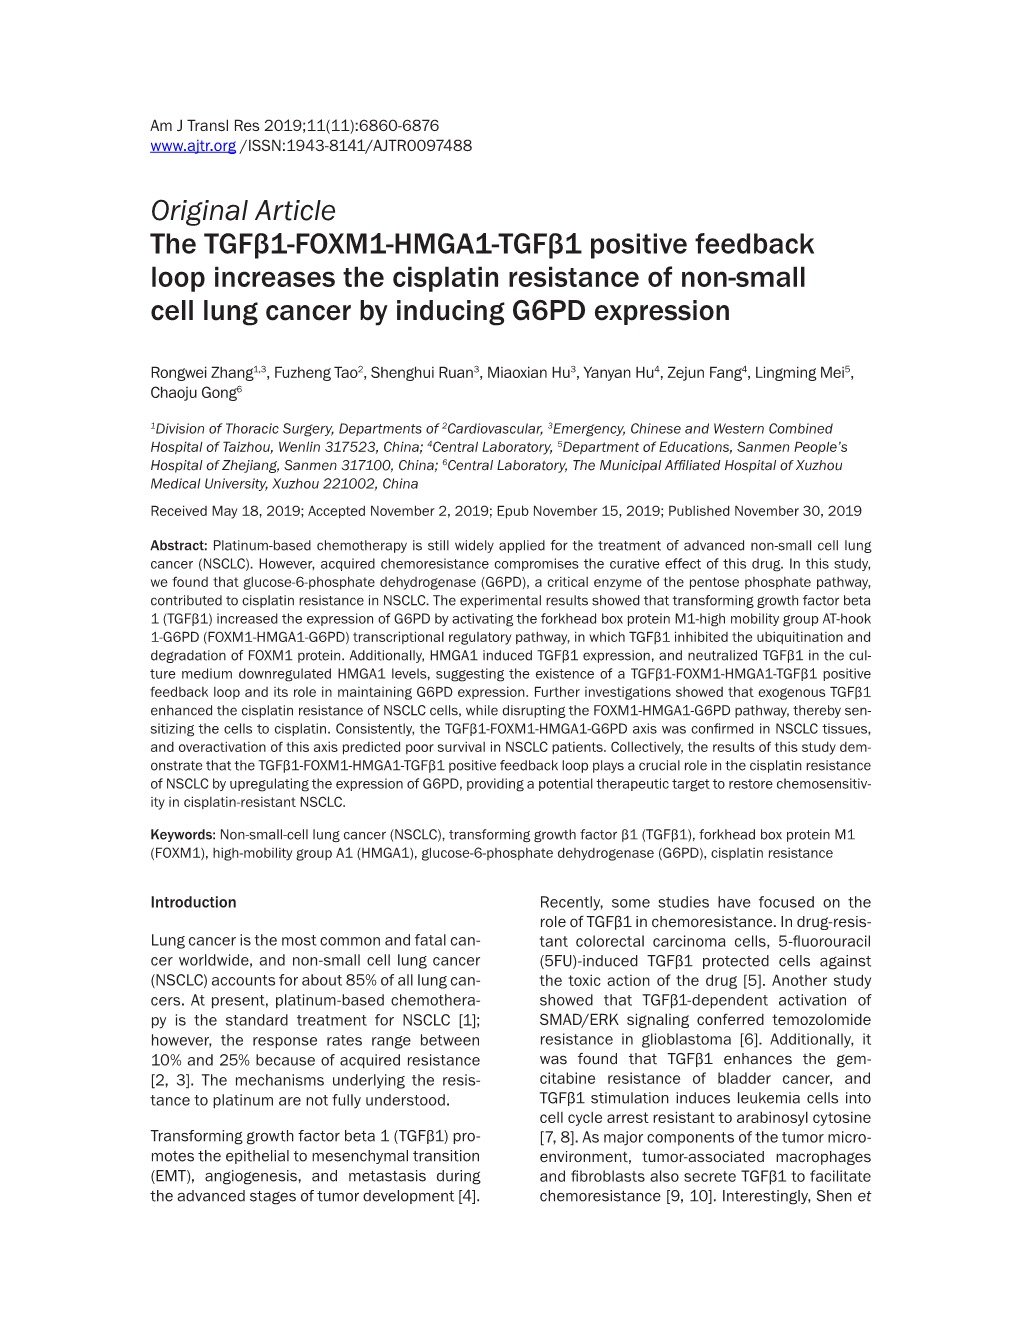 The Tgfβ1-FOXM1-HMGA1-Tgfβ1 Positive Feedback Loop Increases the Cisplatin Resistance of Non-Small Cell Lung Cancer by Inducing G6PD Expression